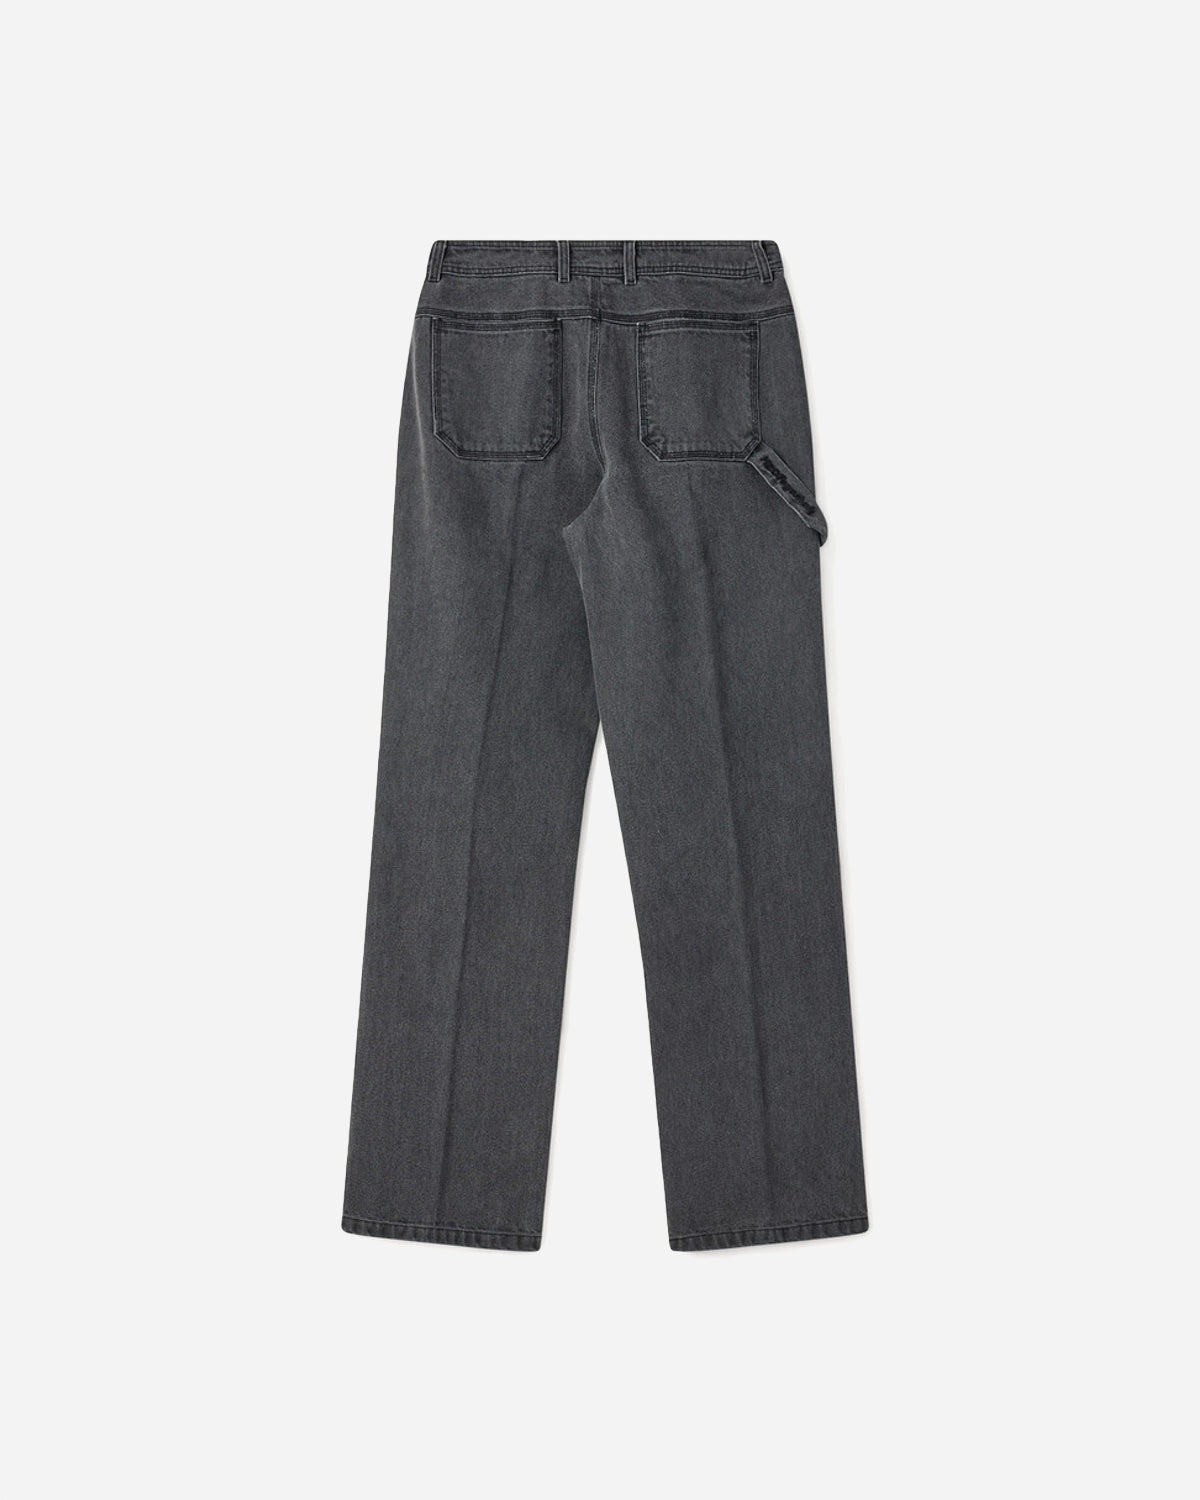 Classic Nice Jeans - Washed Black